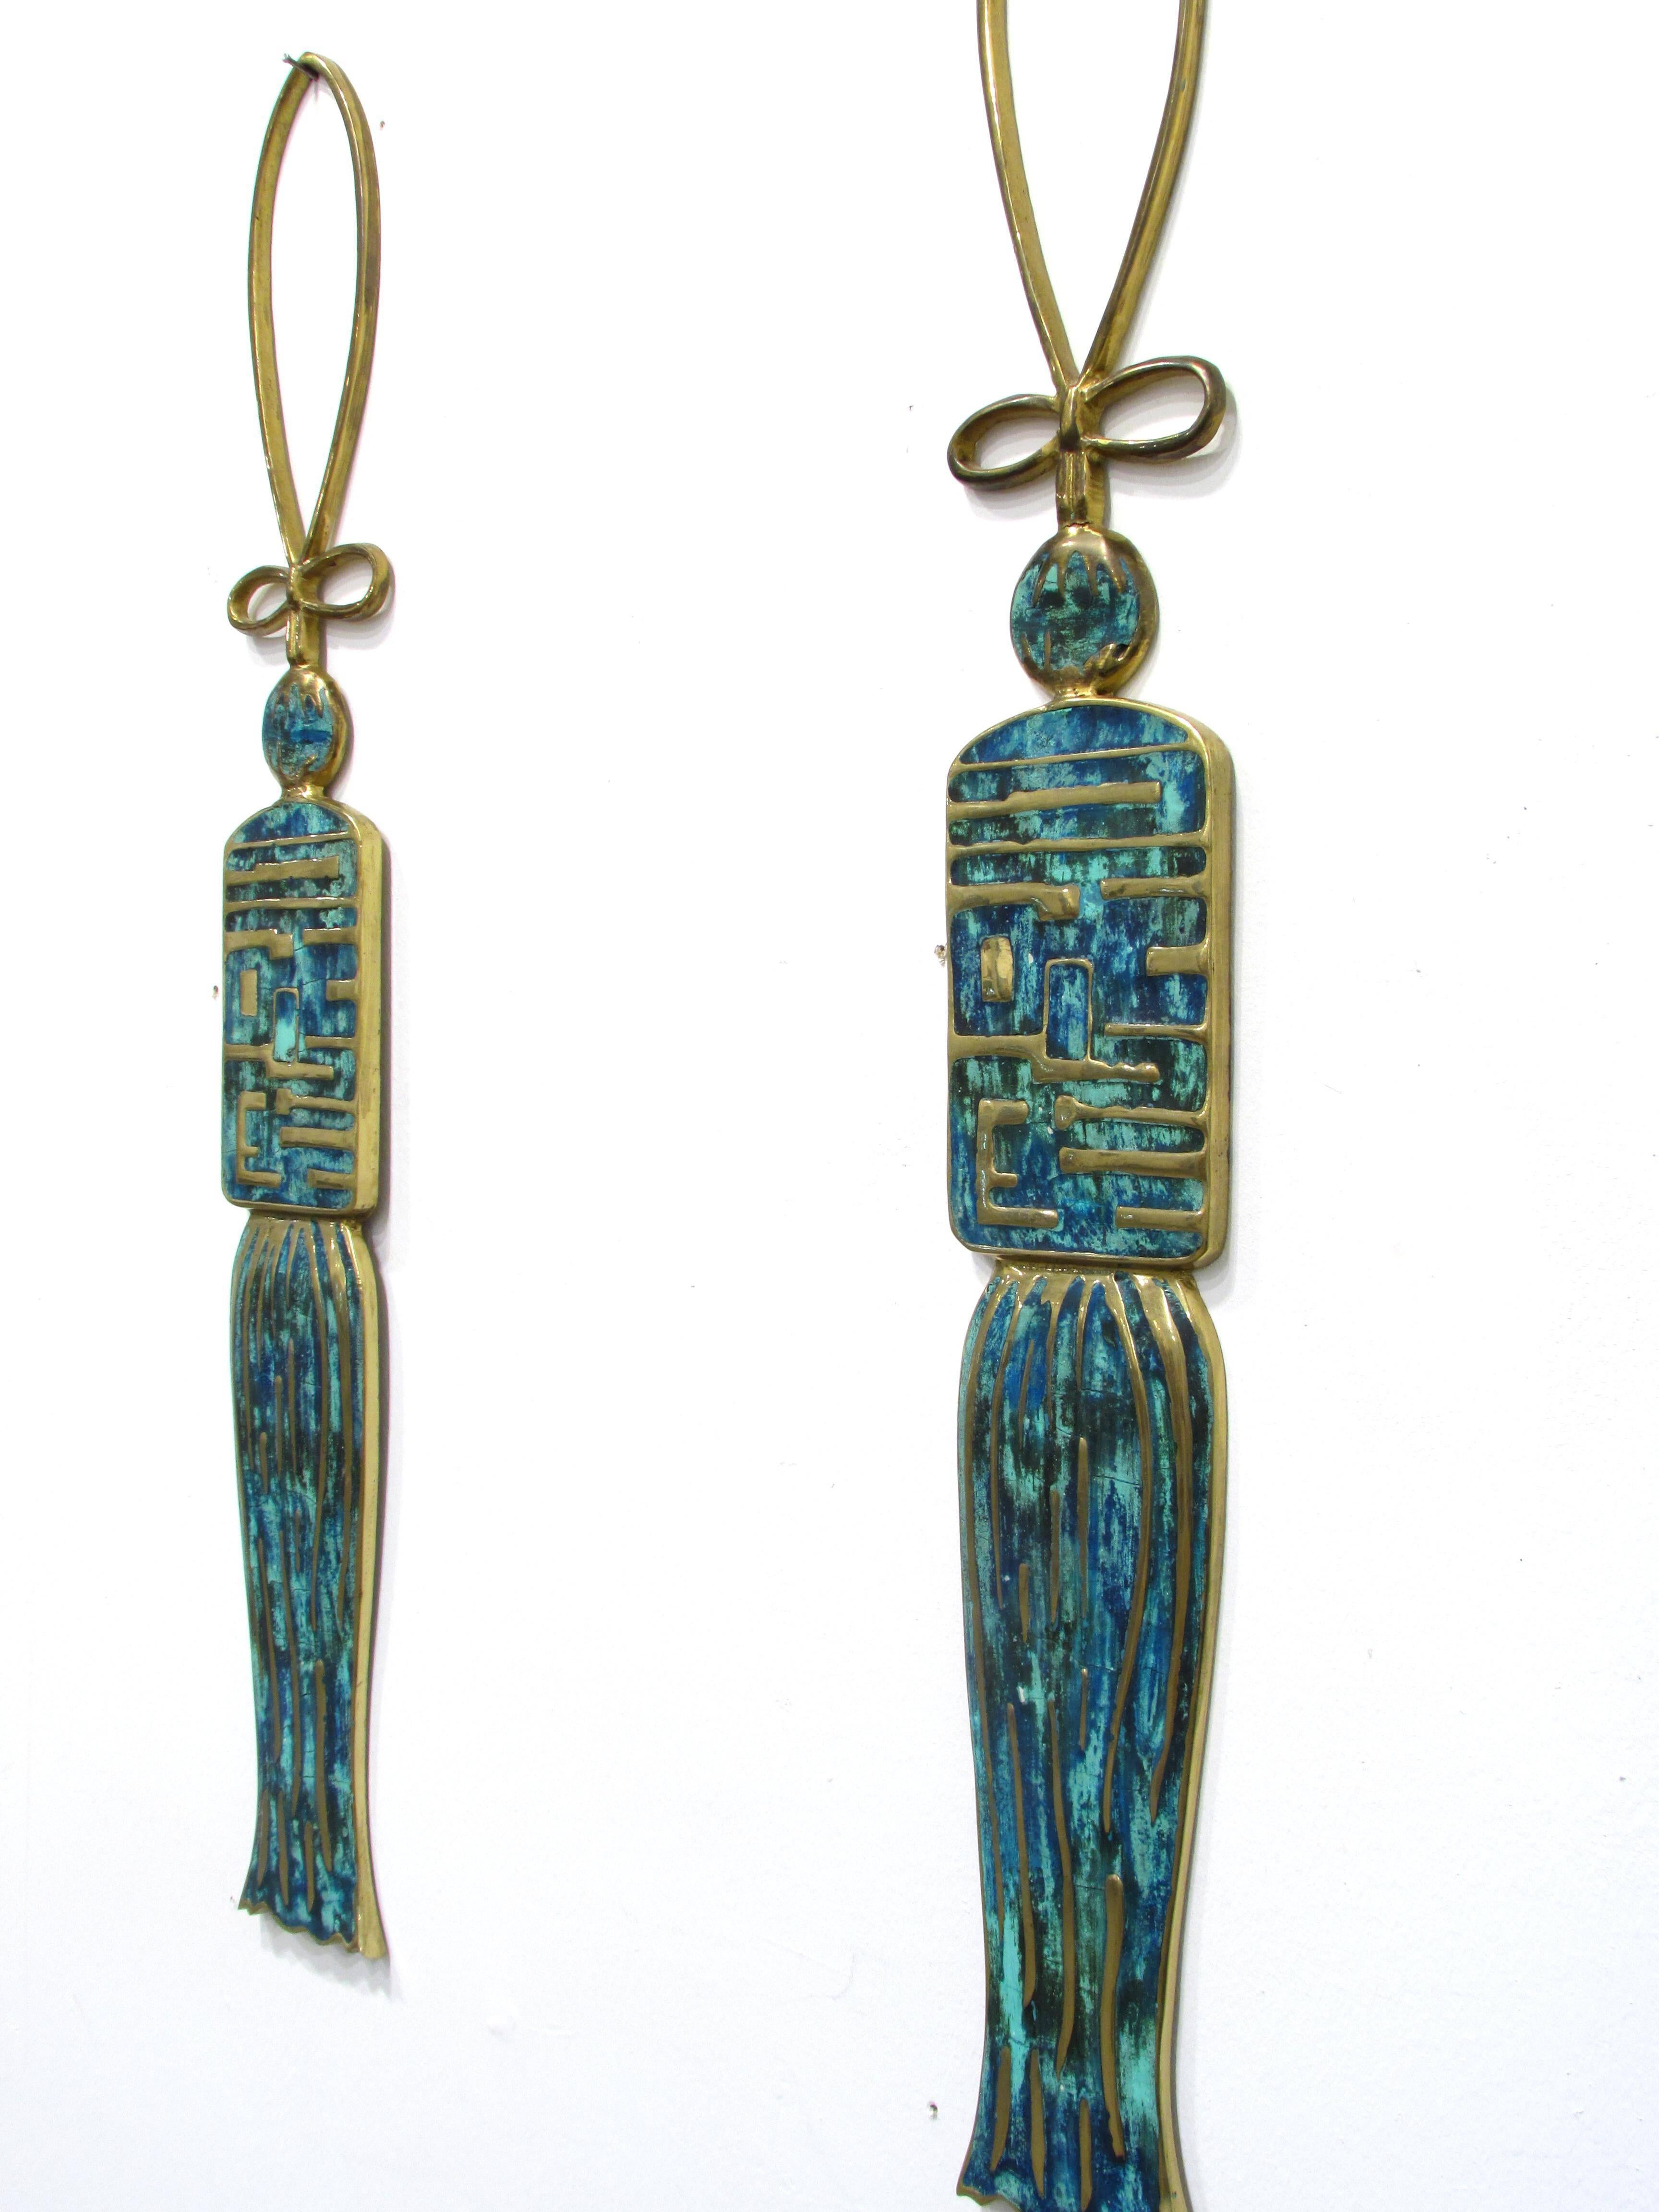 Pair of cast brass and enamel hanging ornaments in the shape of large tassels.